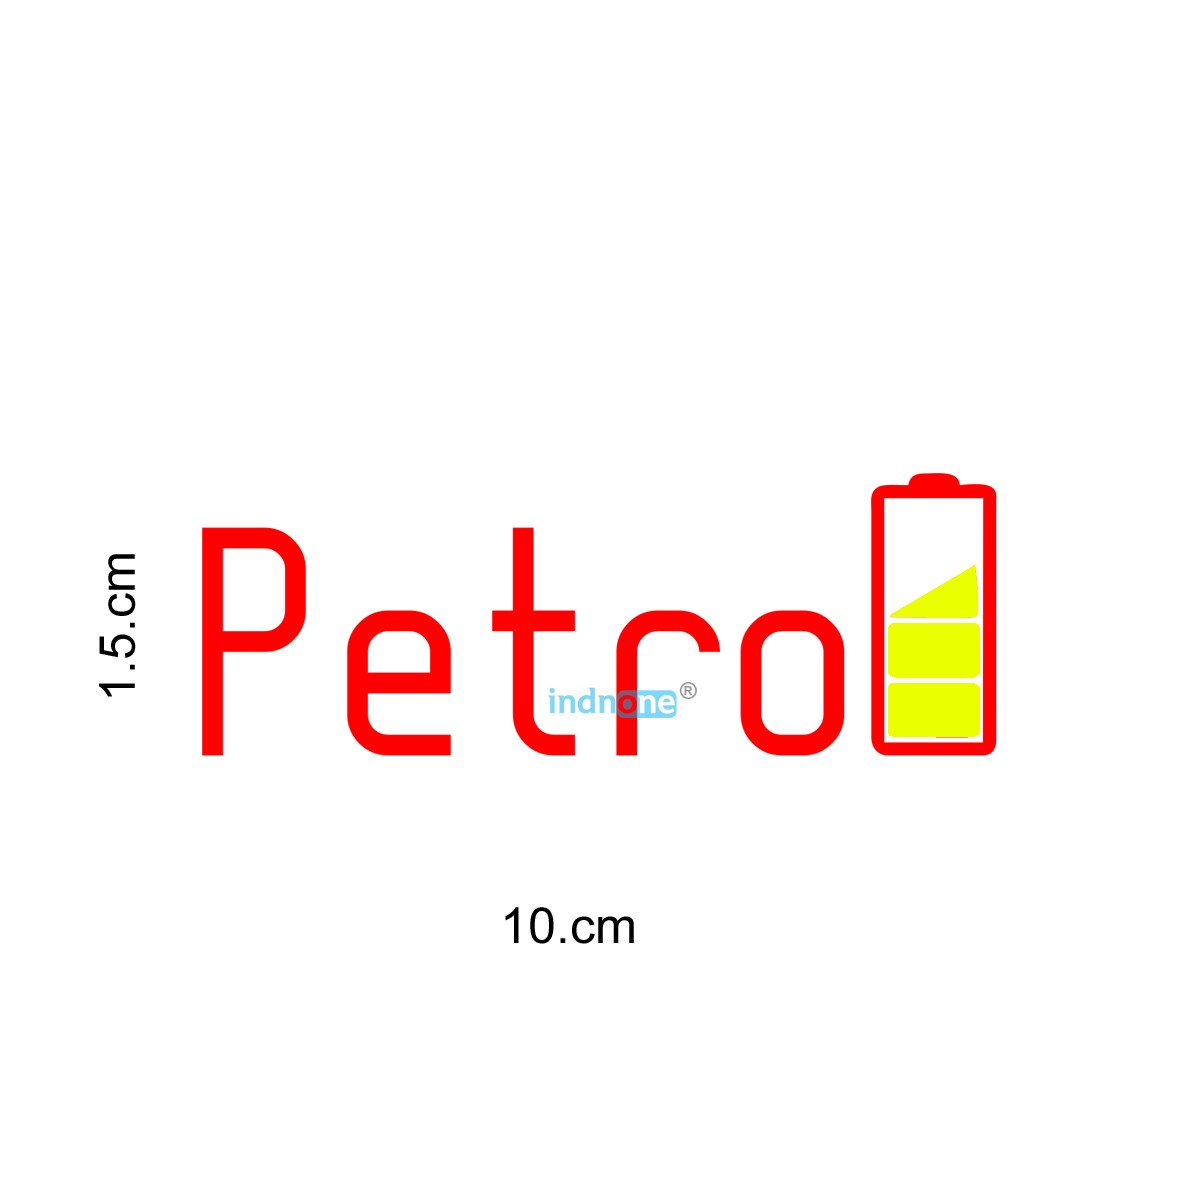 indnone® Battery Logo Petrol Sticker for Car Fuel Lid Color Yellow & Red